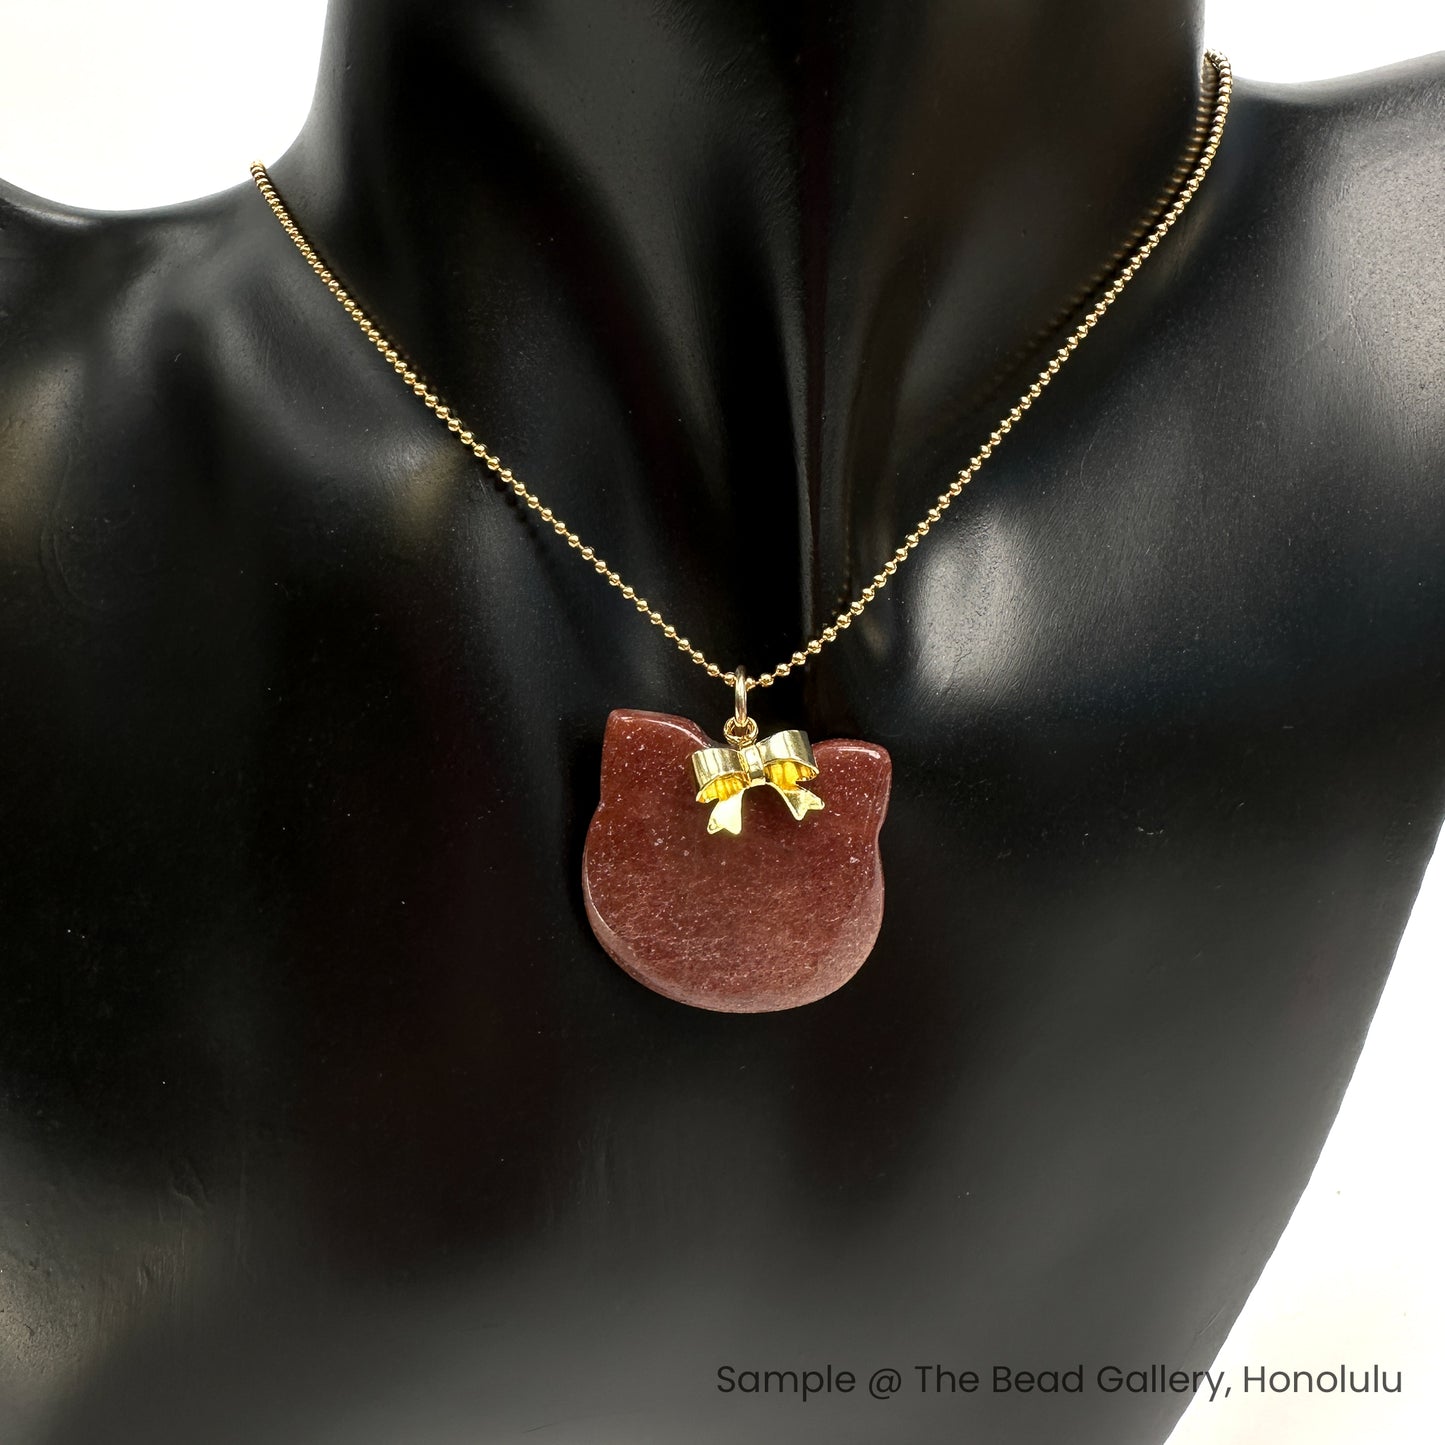 Red Trolleite Cat Pendant - 1 pc.-The Bead Gallery Honolulu